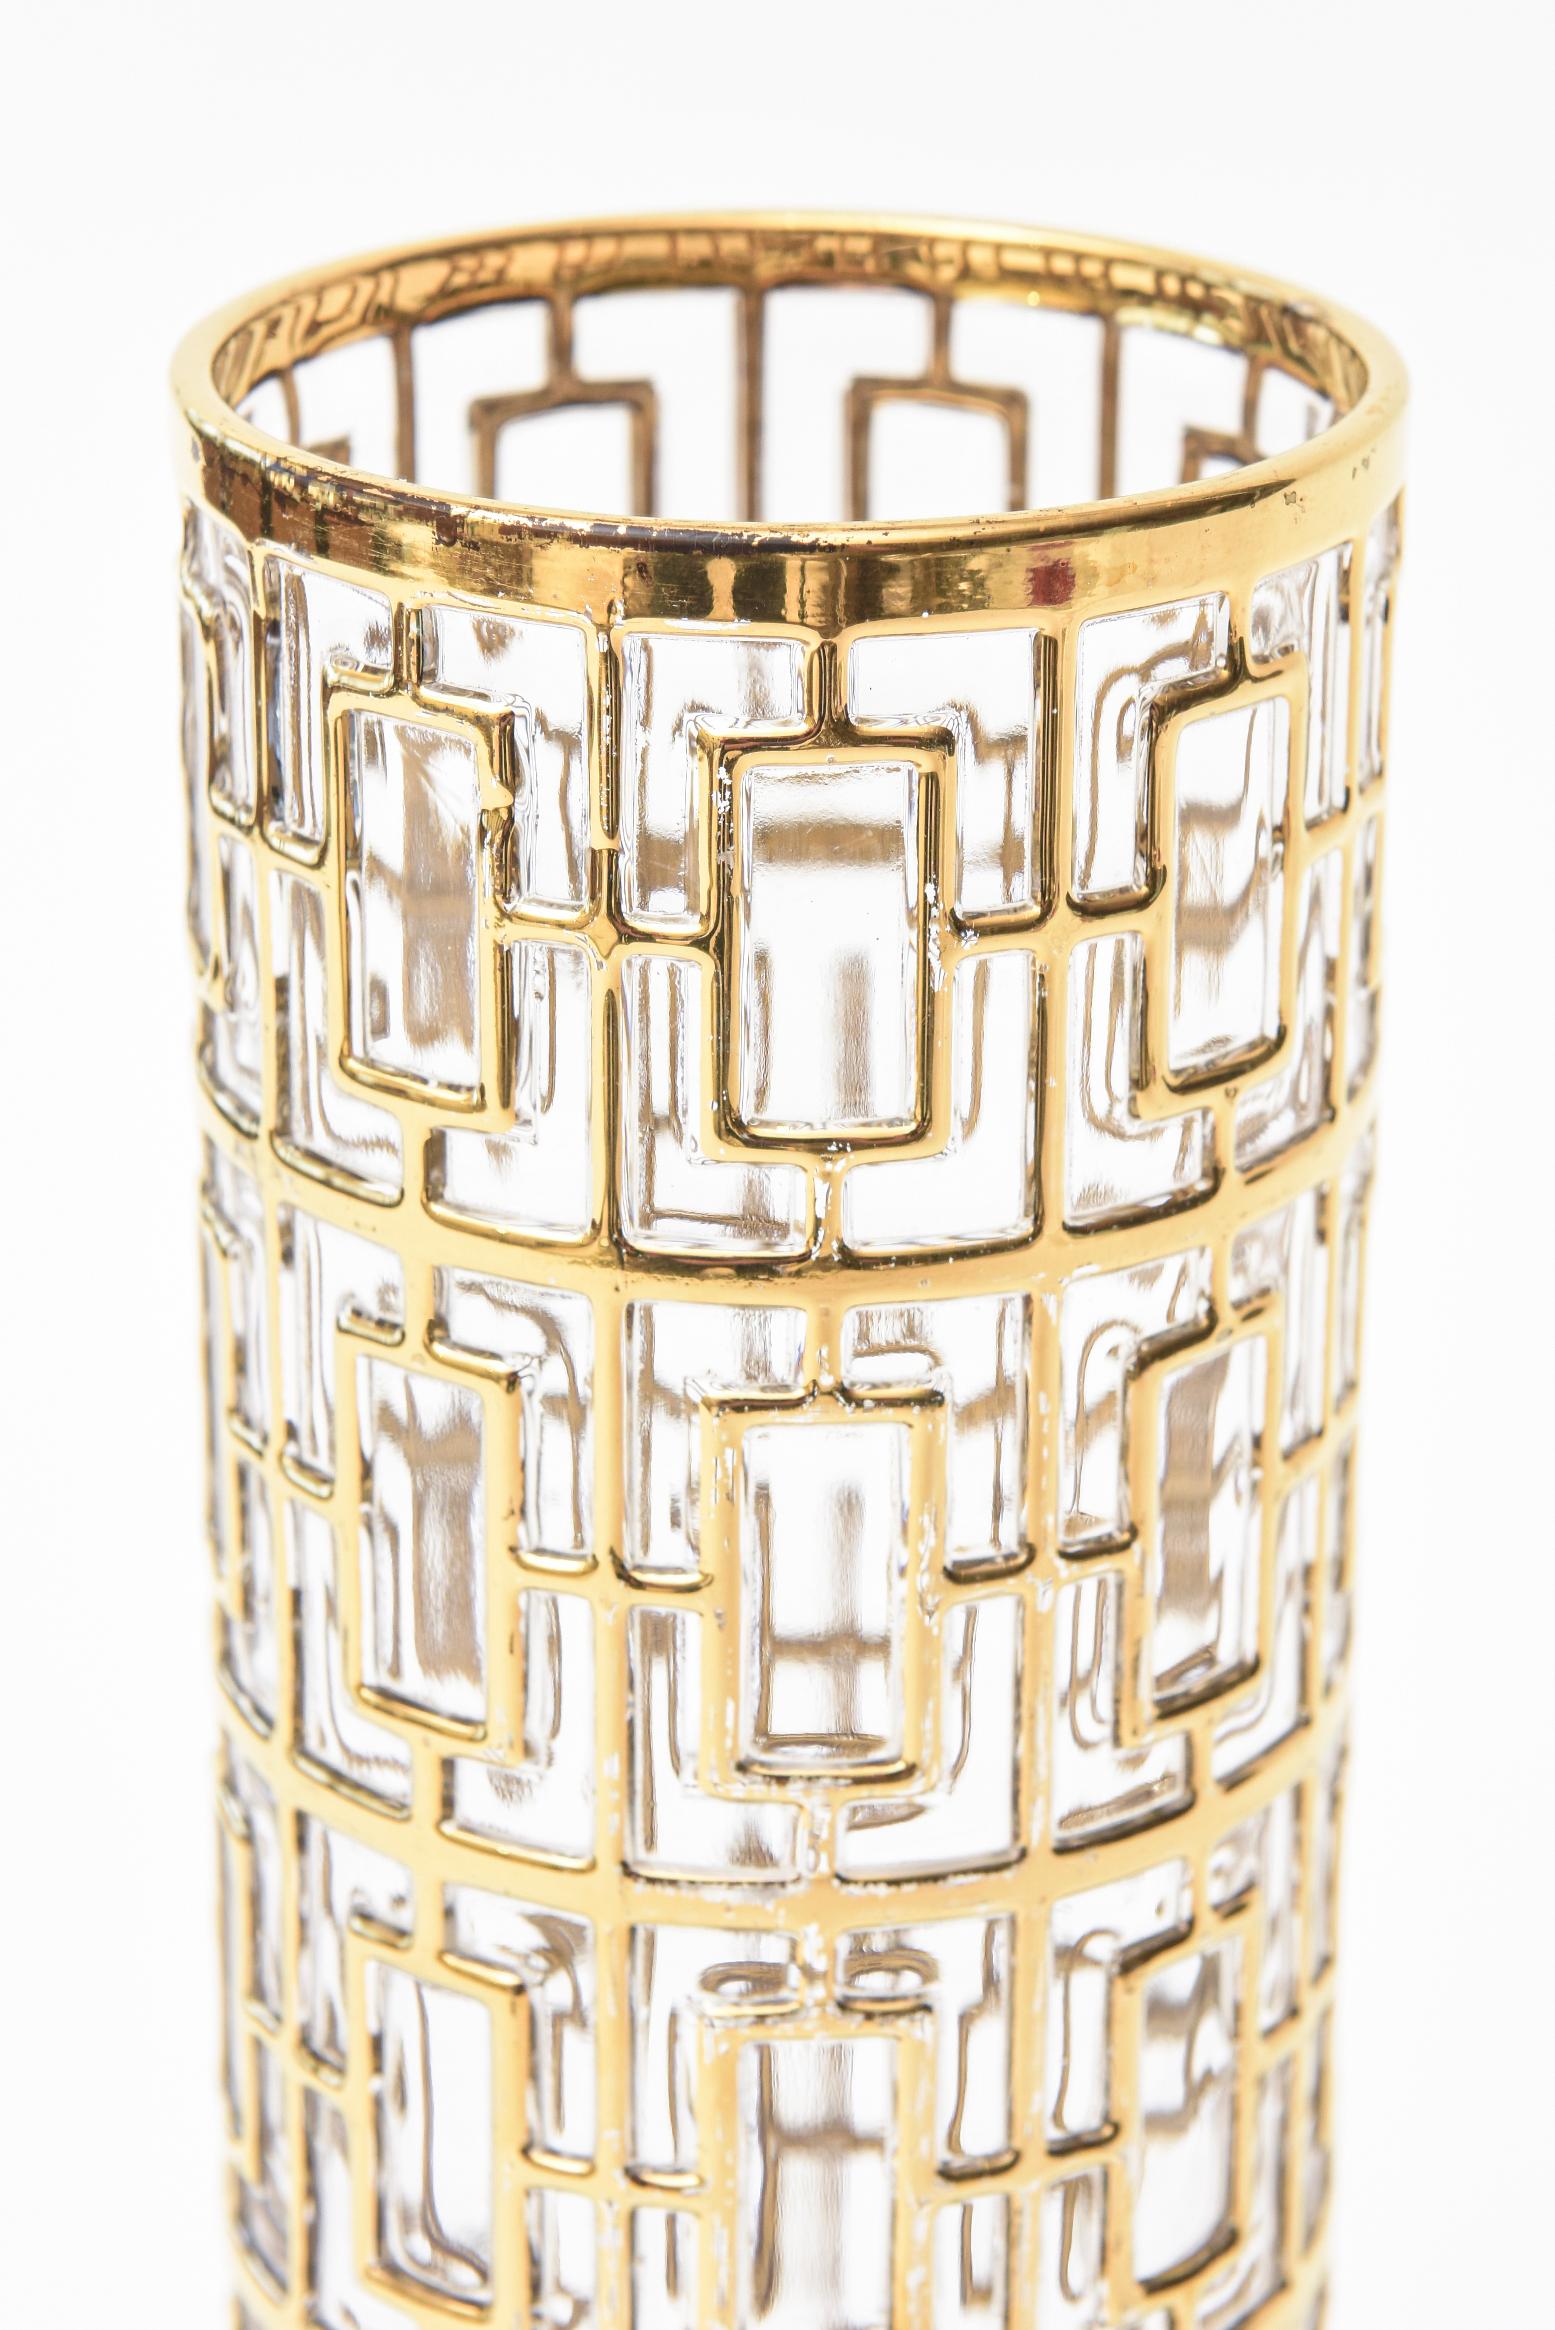 This wonderful vintage signed Imperial glass vase or cocktail mixer from the 1960s has 22-carat gold-plated Greek key like shohji screen or trellis overlay over the clear glass cylinder. It is the company of Imperial Glass from Ohio. This vase now